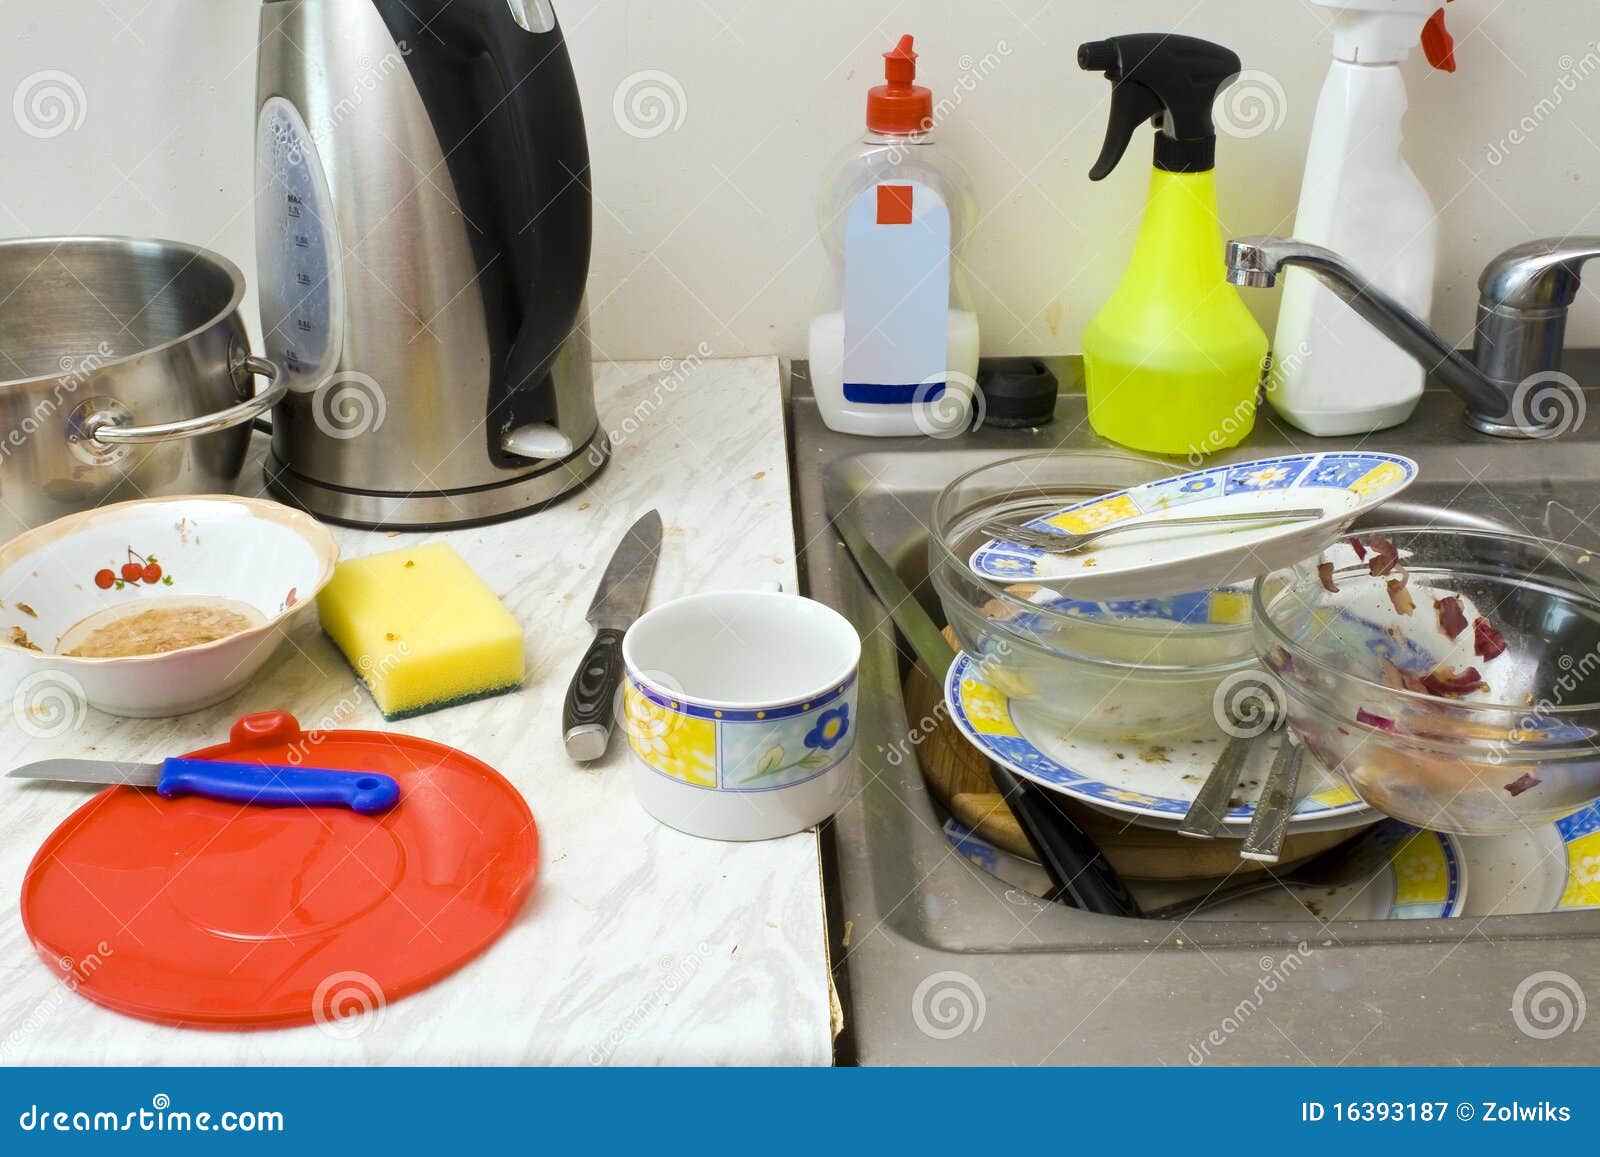 mess in a kitchen